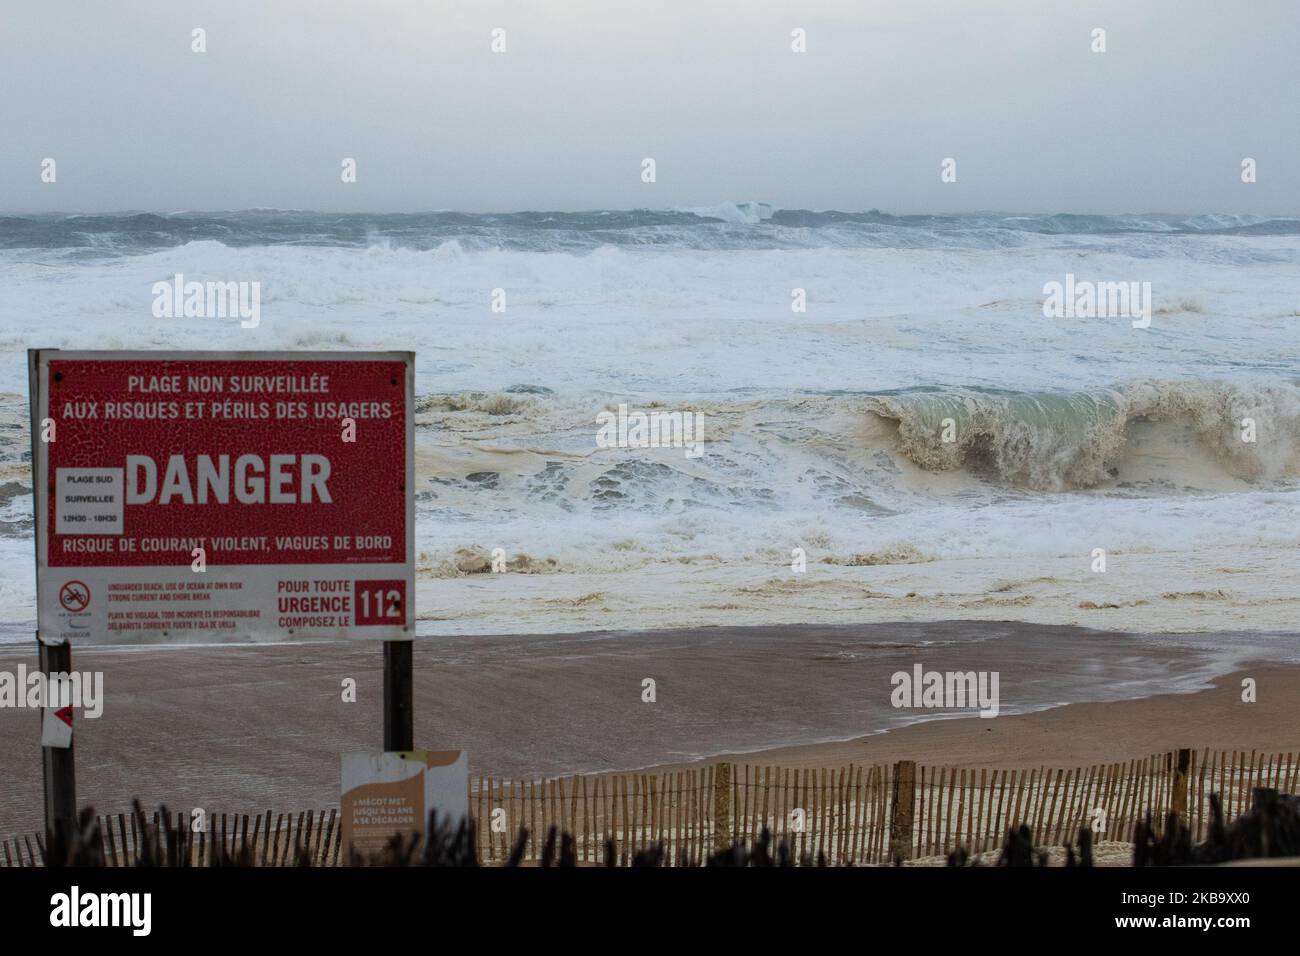 Waves break on the coast in Capbreton near the ocean on November 3, 2019 during the Amelie storm. Some 100,000 households were deprived of electricity in south western France, where the Atlantic coast was swept by storm Amelie, causing damage but no casualties, according to an initial assessment by the emergency services and the prefectures. (Photo by Jerome Gilles/NurPhoto) Stock Photo